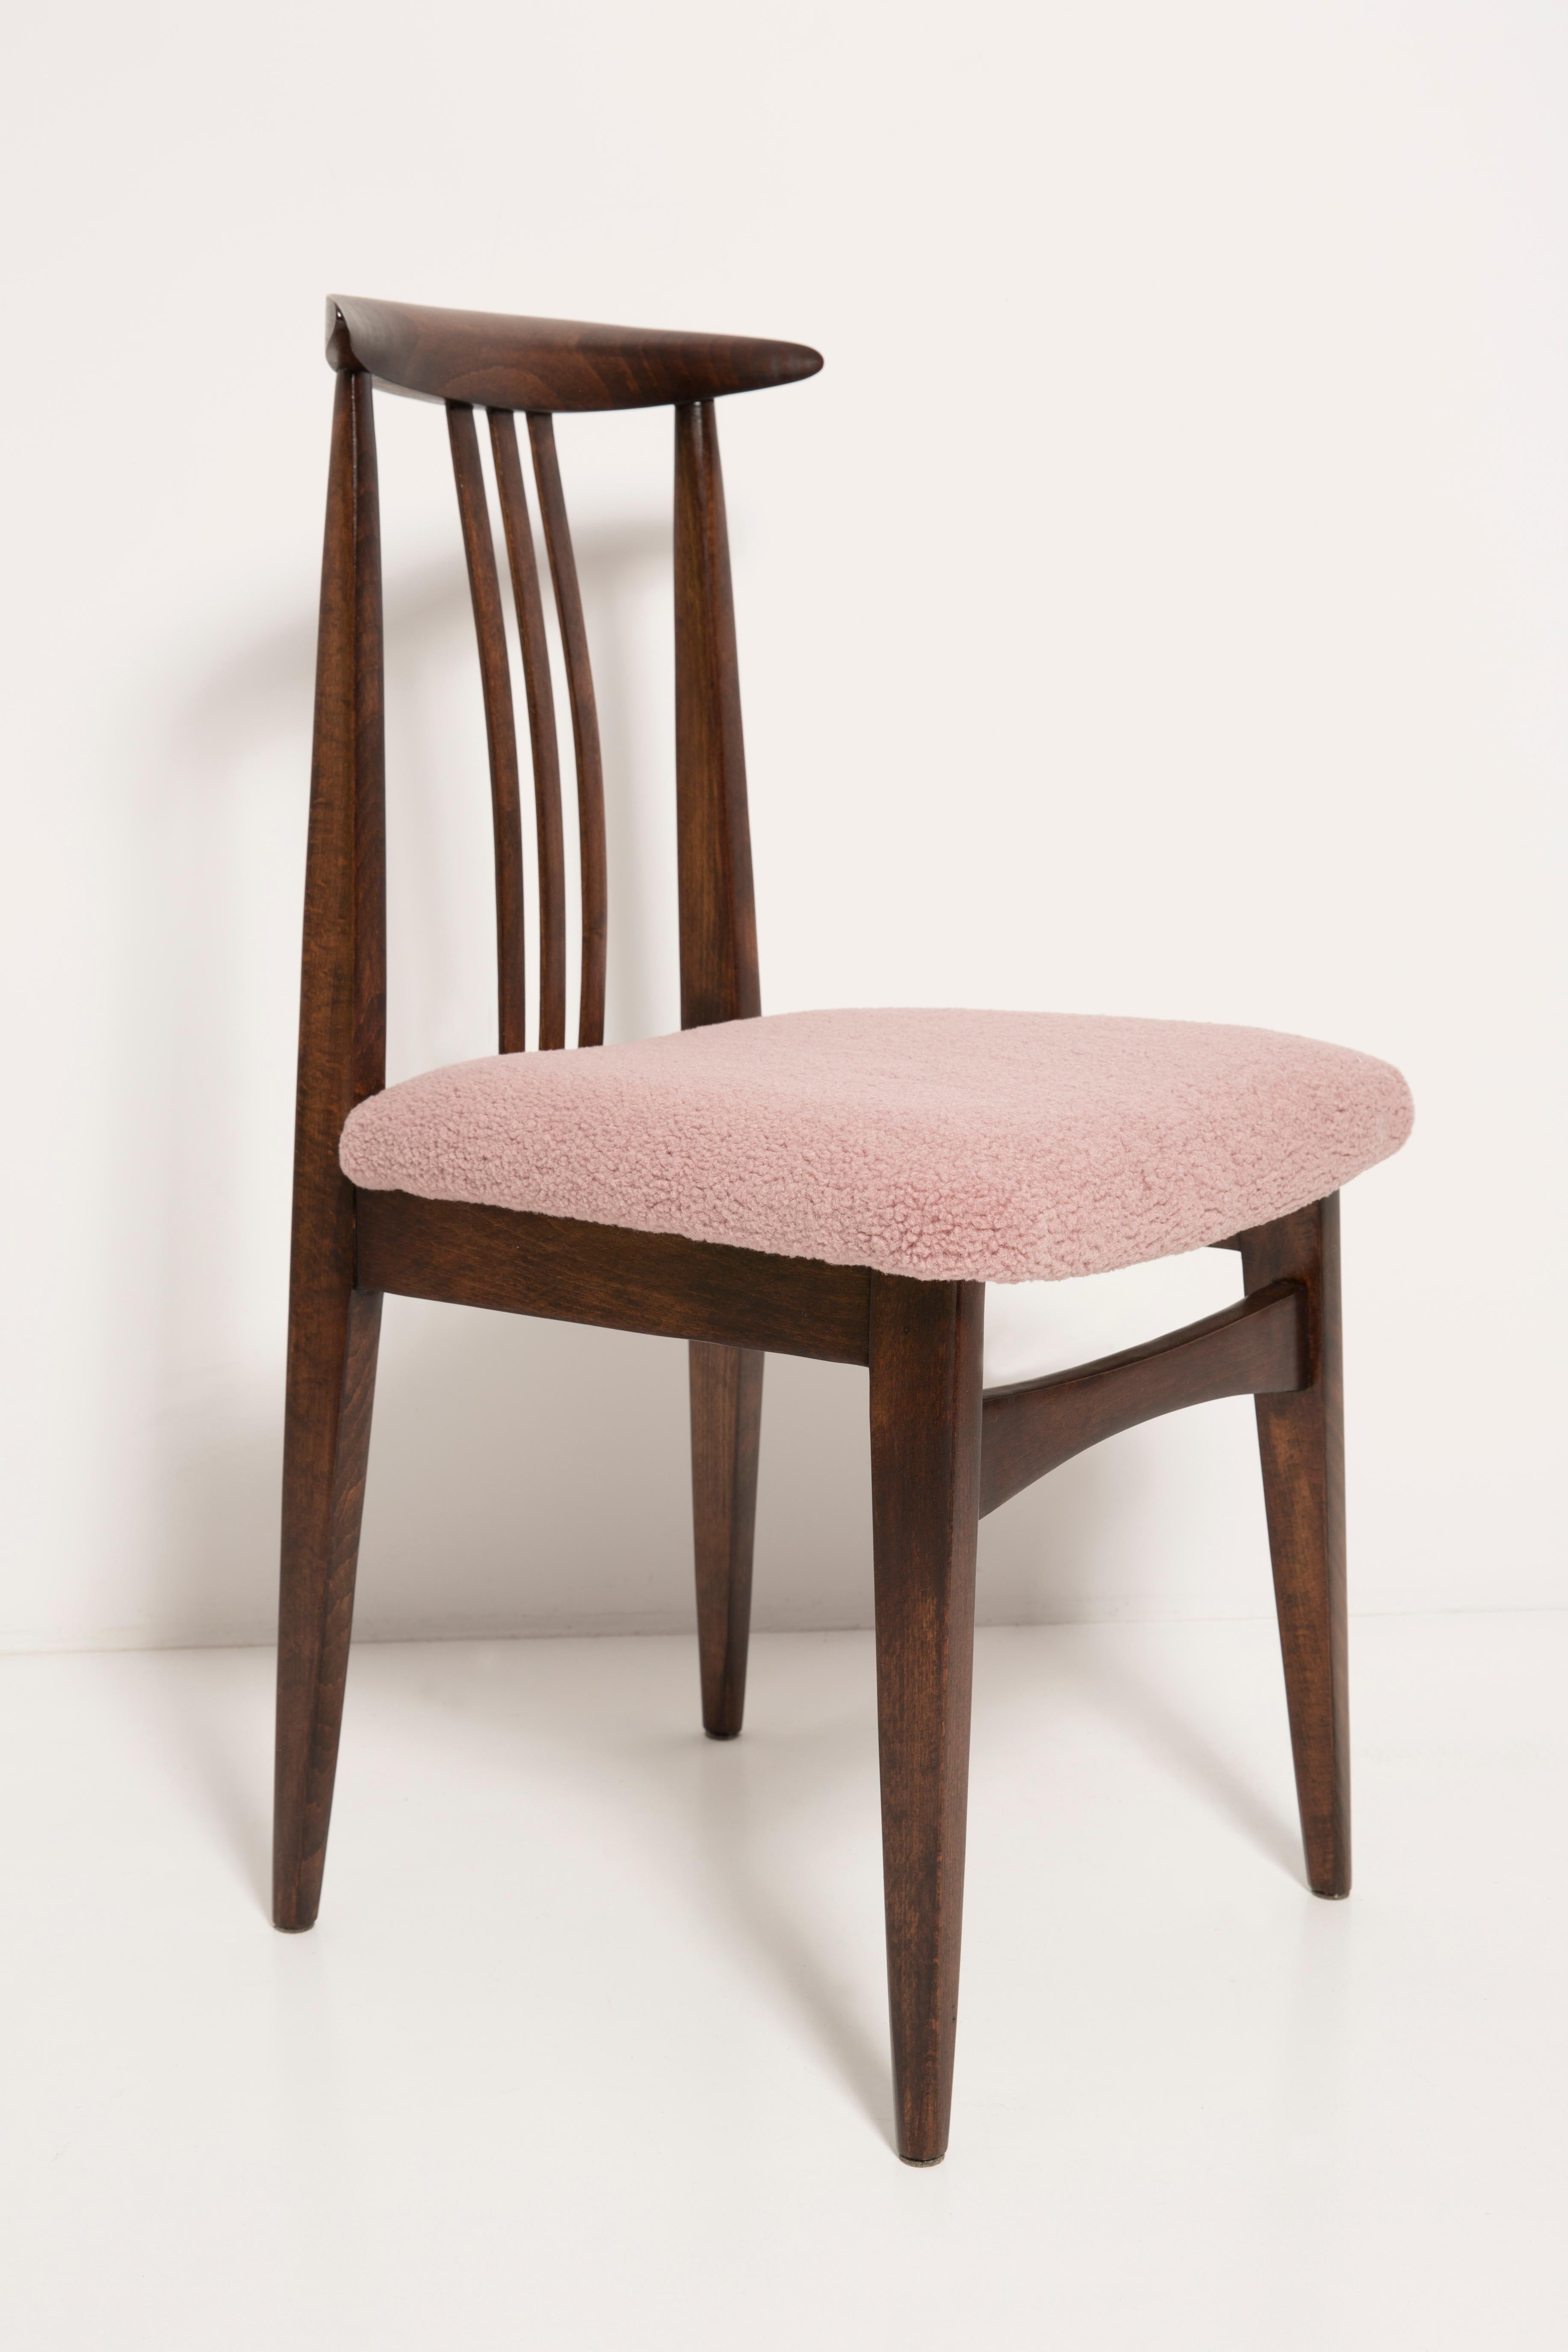 Polish Mid-Century Modern Pink Boucle Chair, Designed by M. Zielinski, Europe, 1960s For Sale